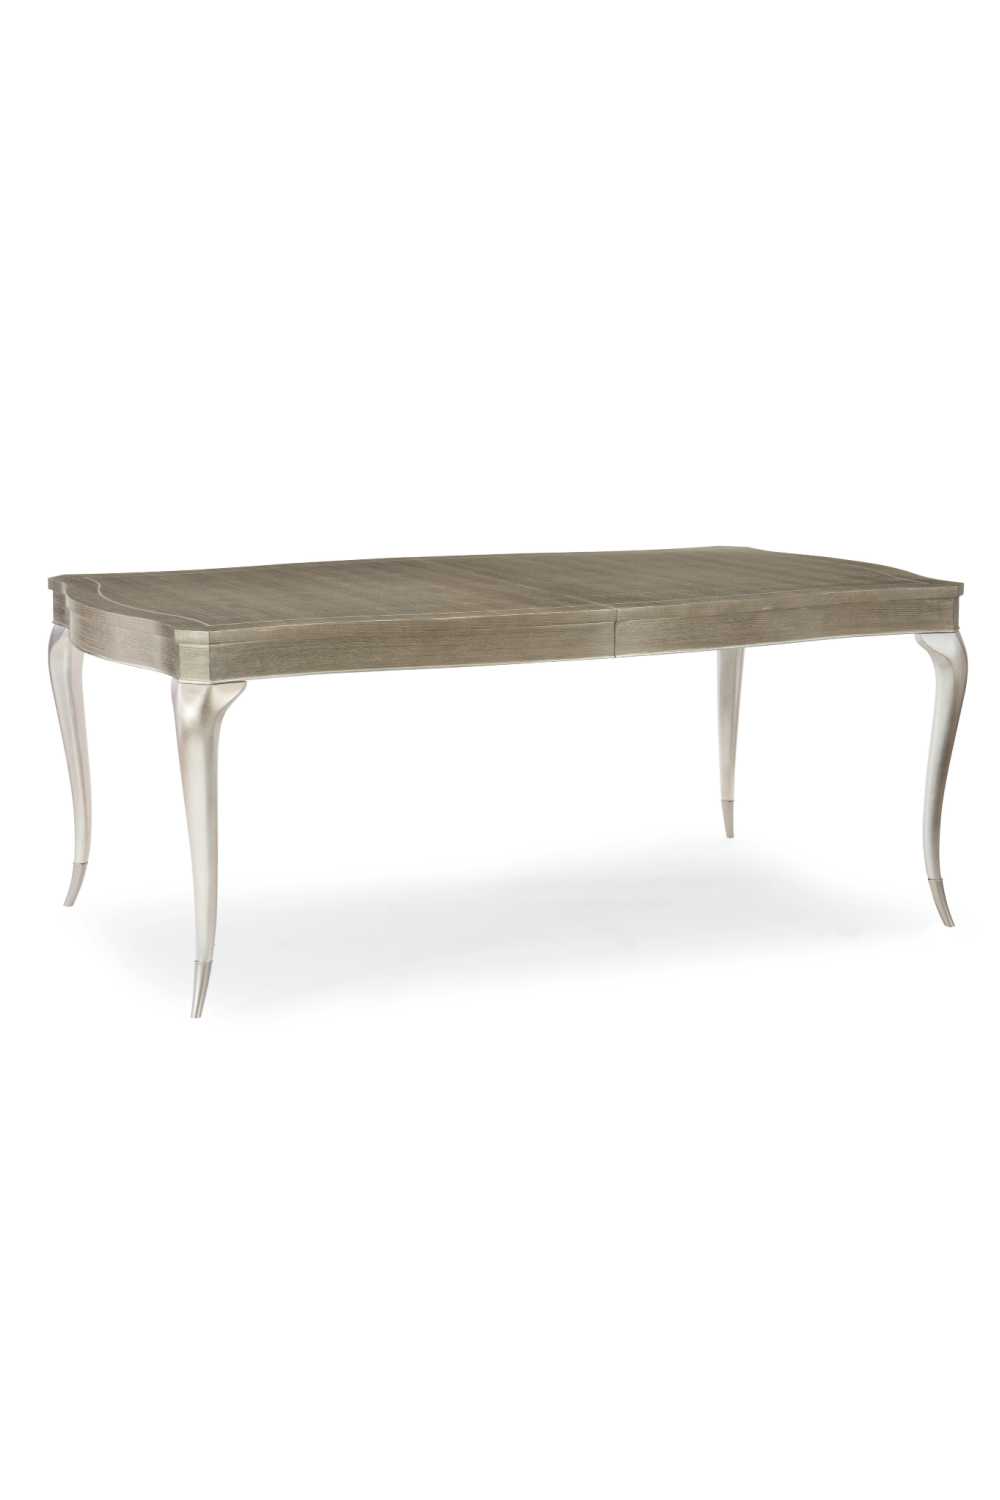 Silver Trimmed Extendable Dining Table | Caracole Avondale | Oroa.com